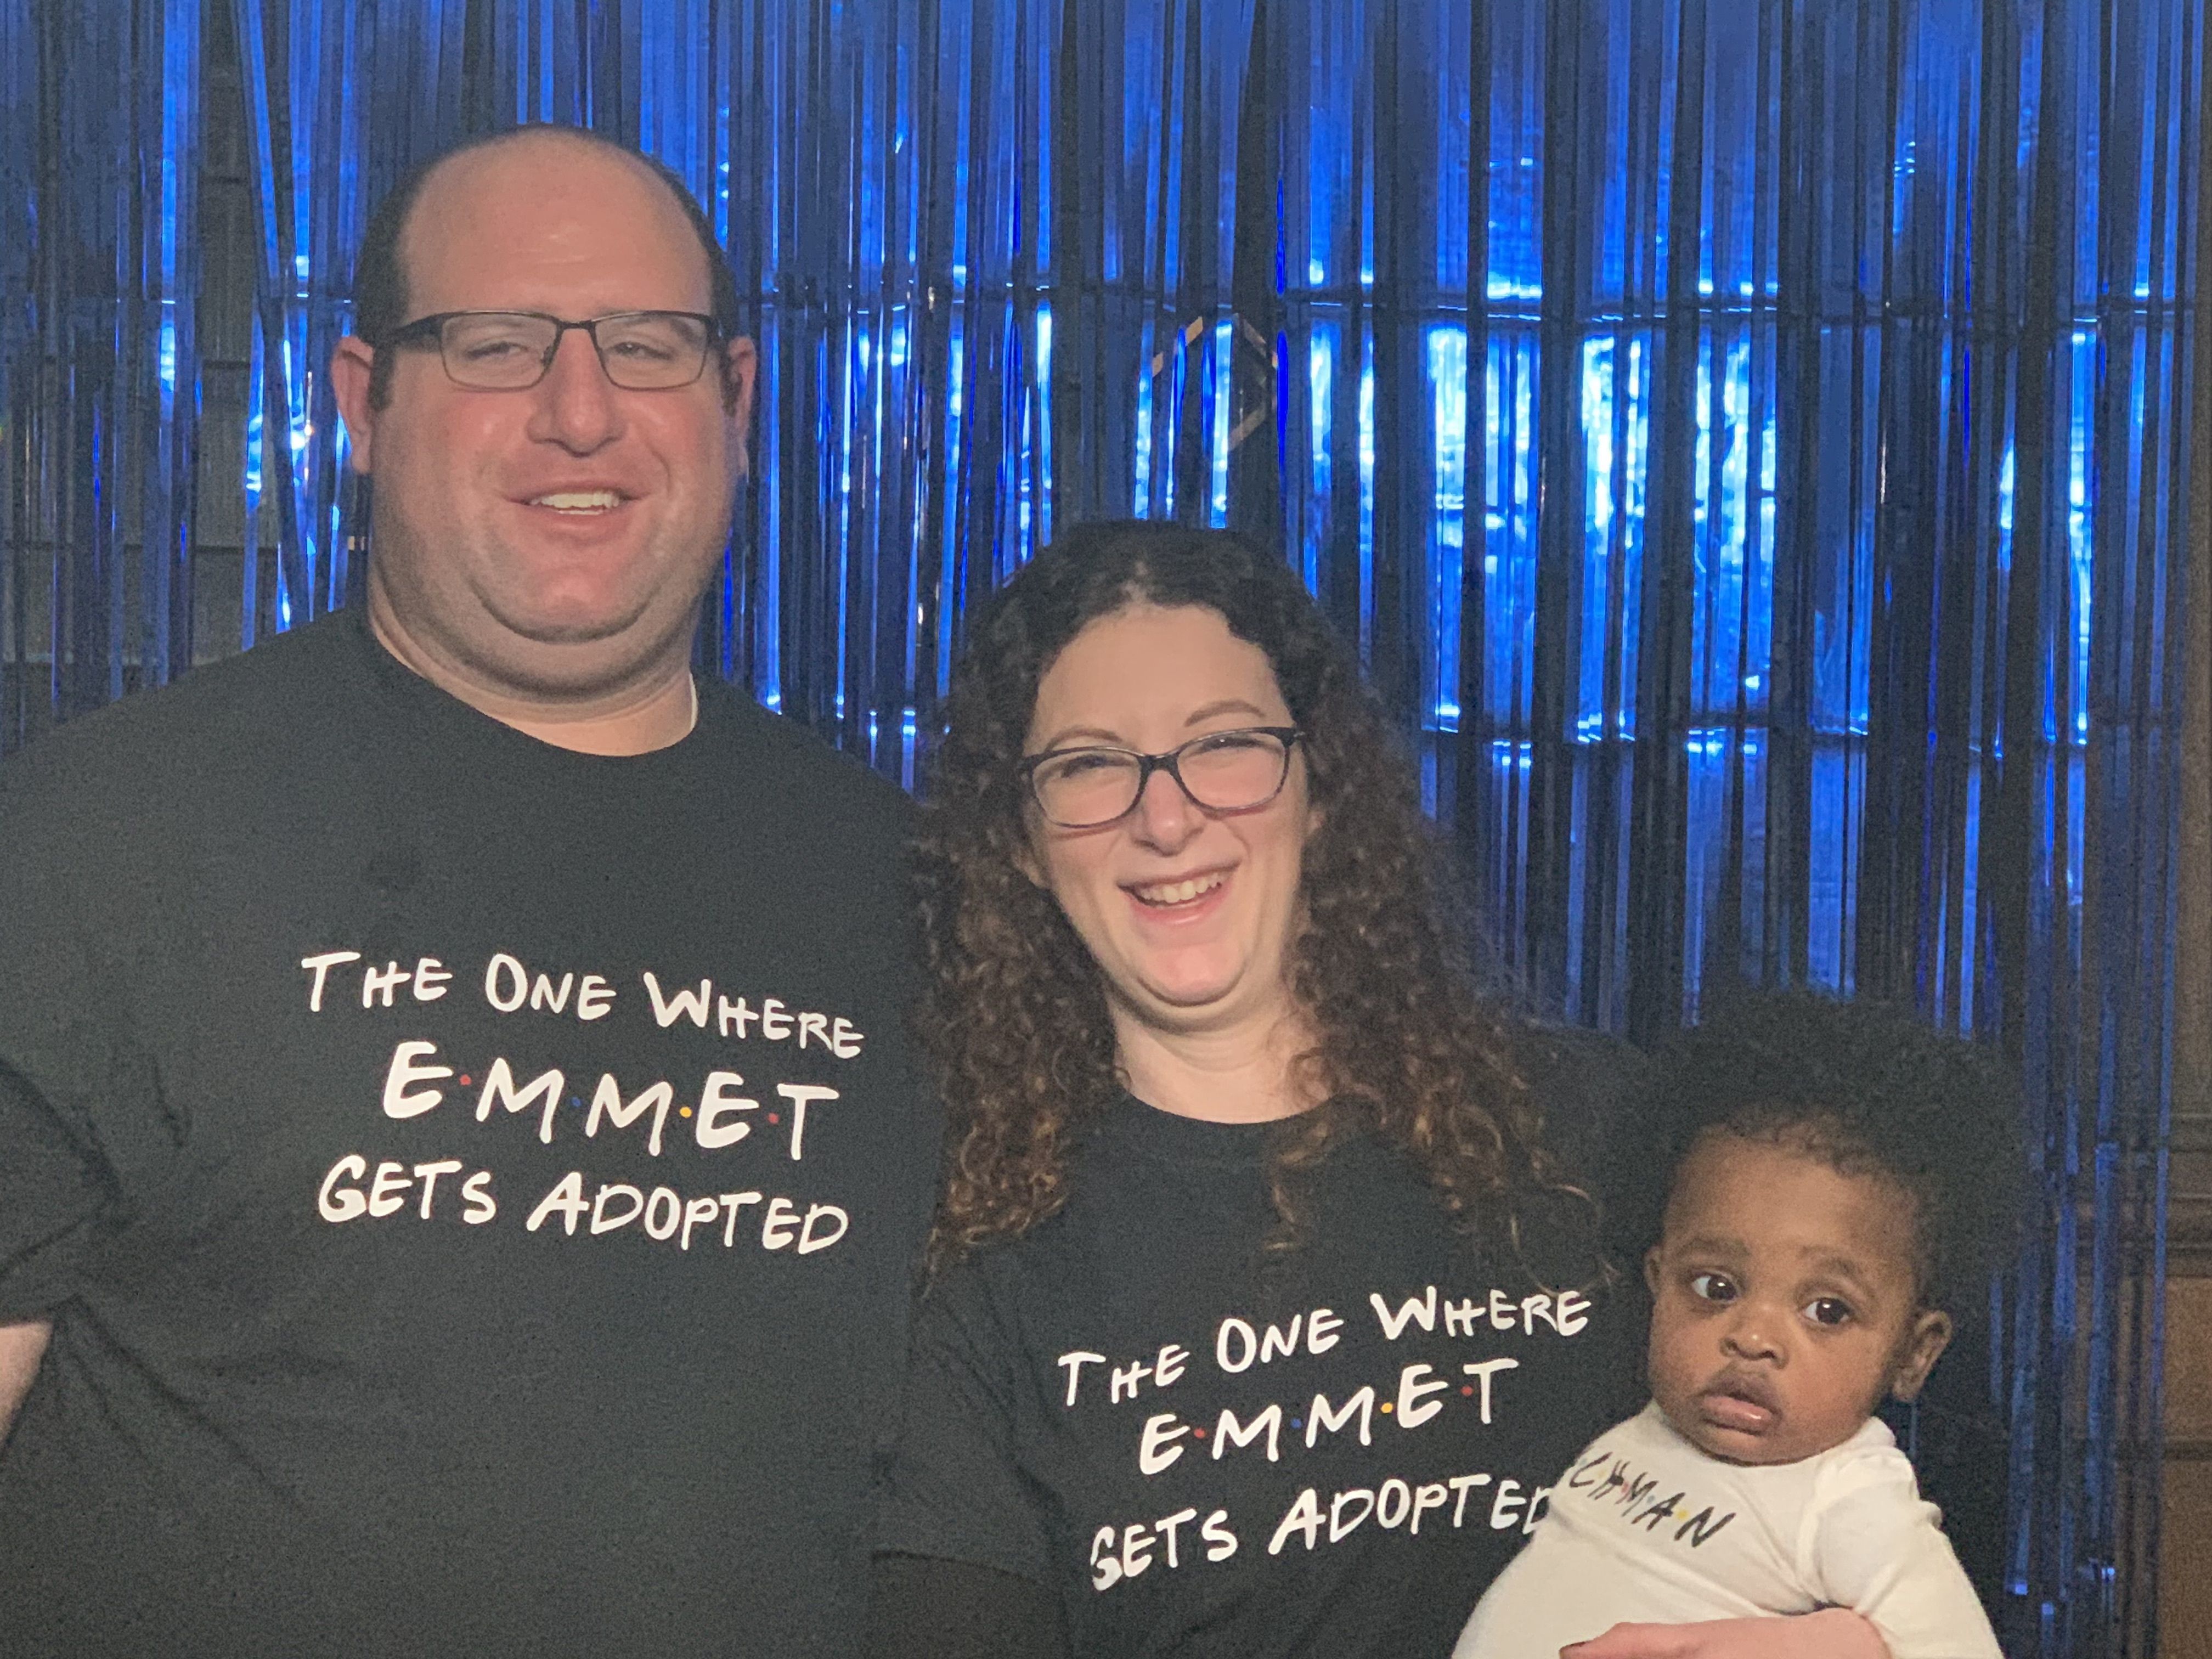 Donations Made to Adoption Network Cleveland Celebrate a Family Coming Together